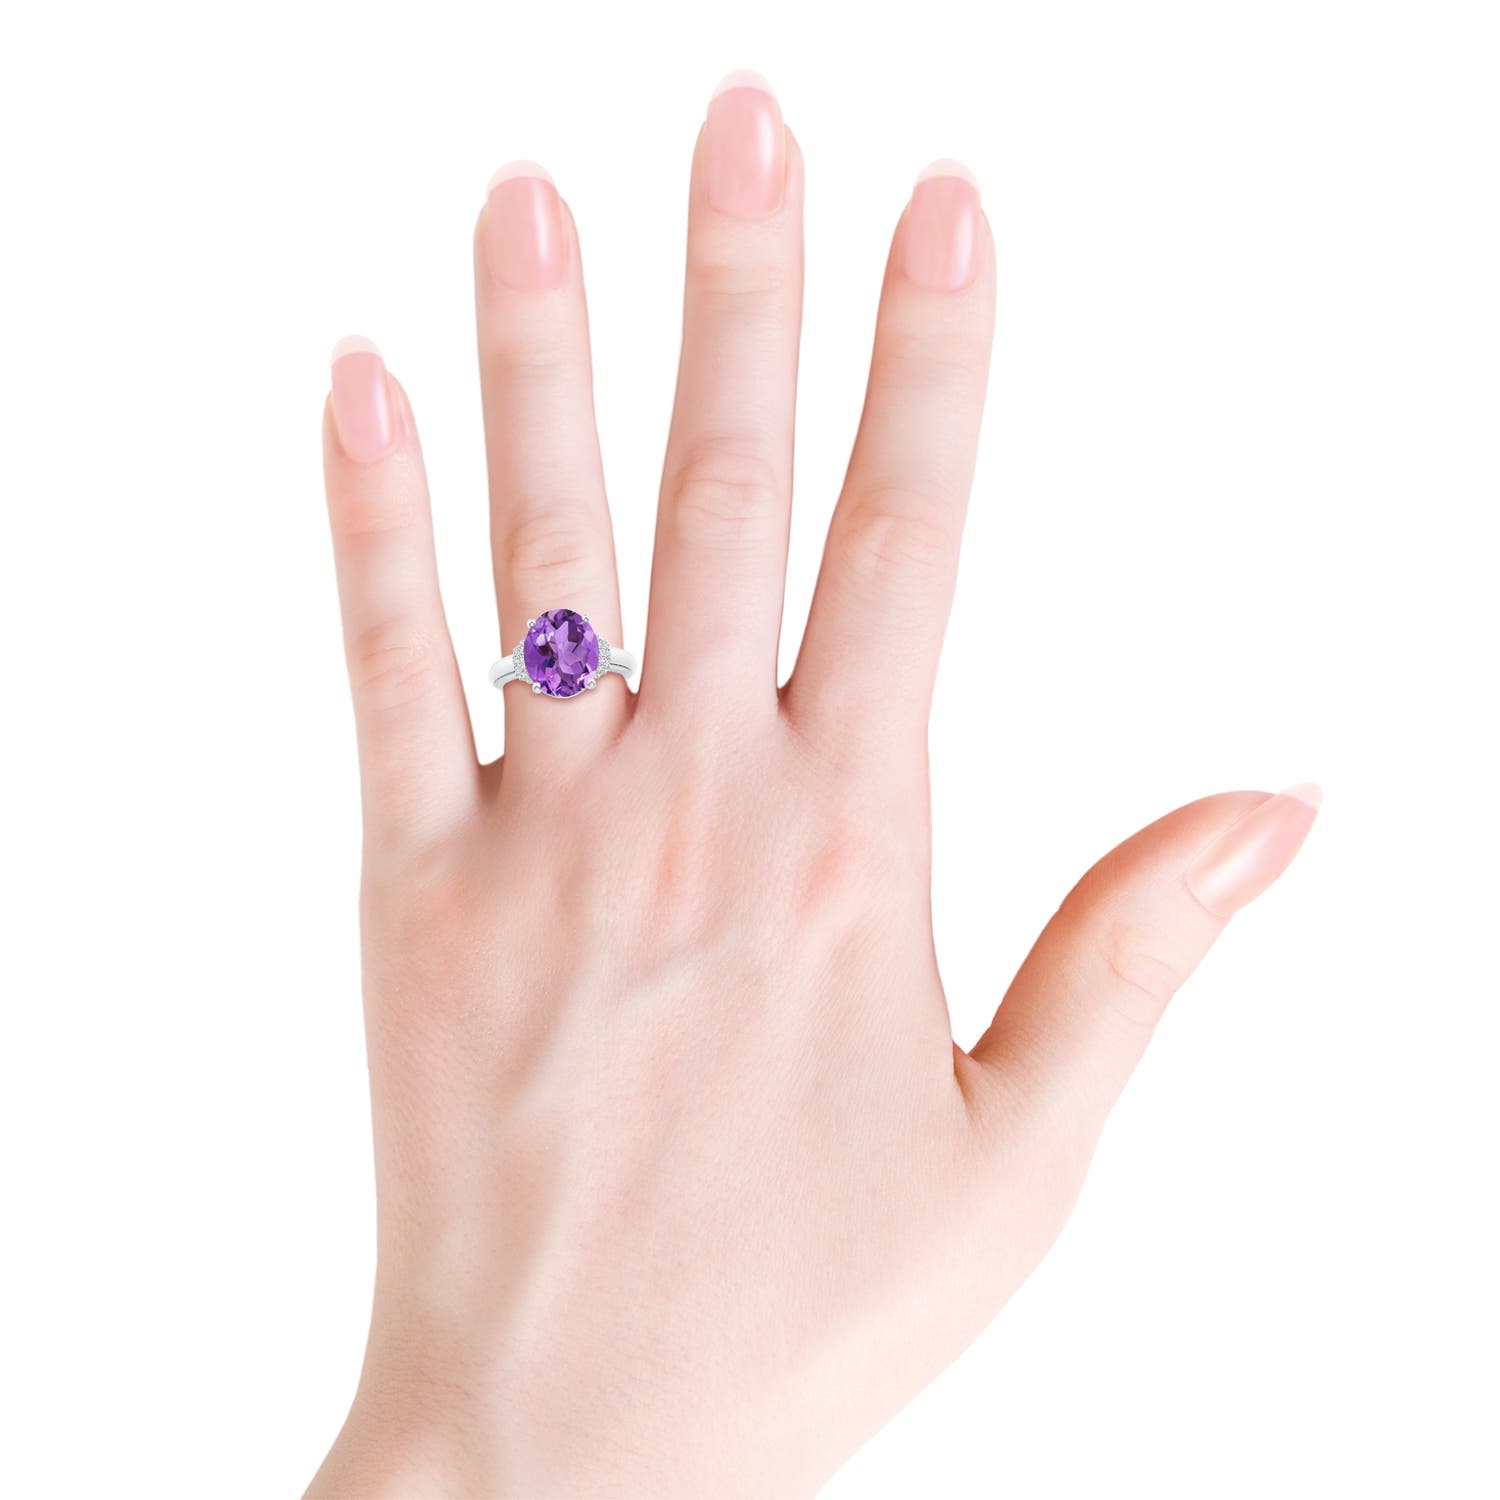 AA - Amethyst / 4.54 CT / 14 KT White Gold